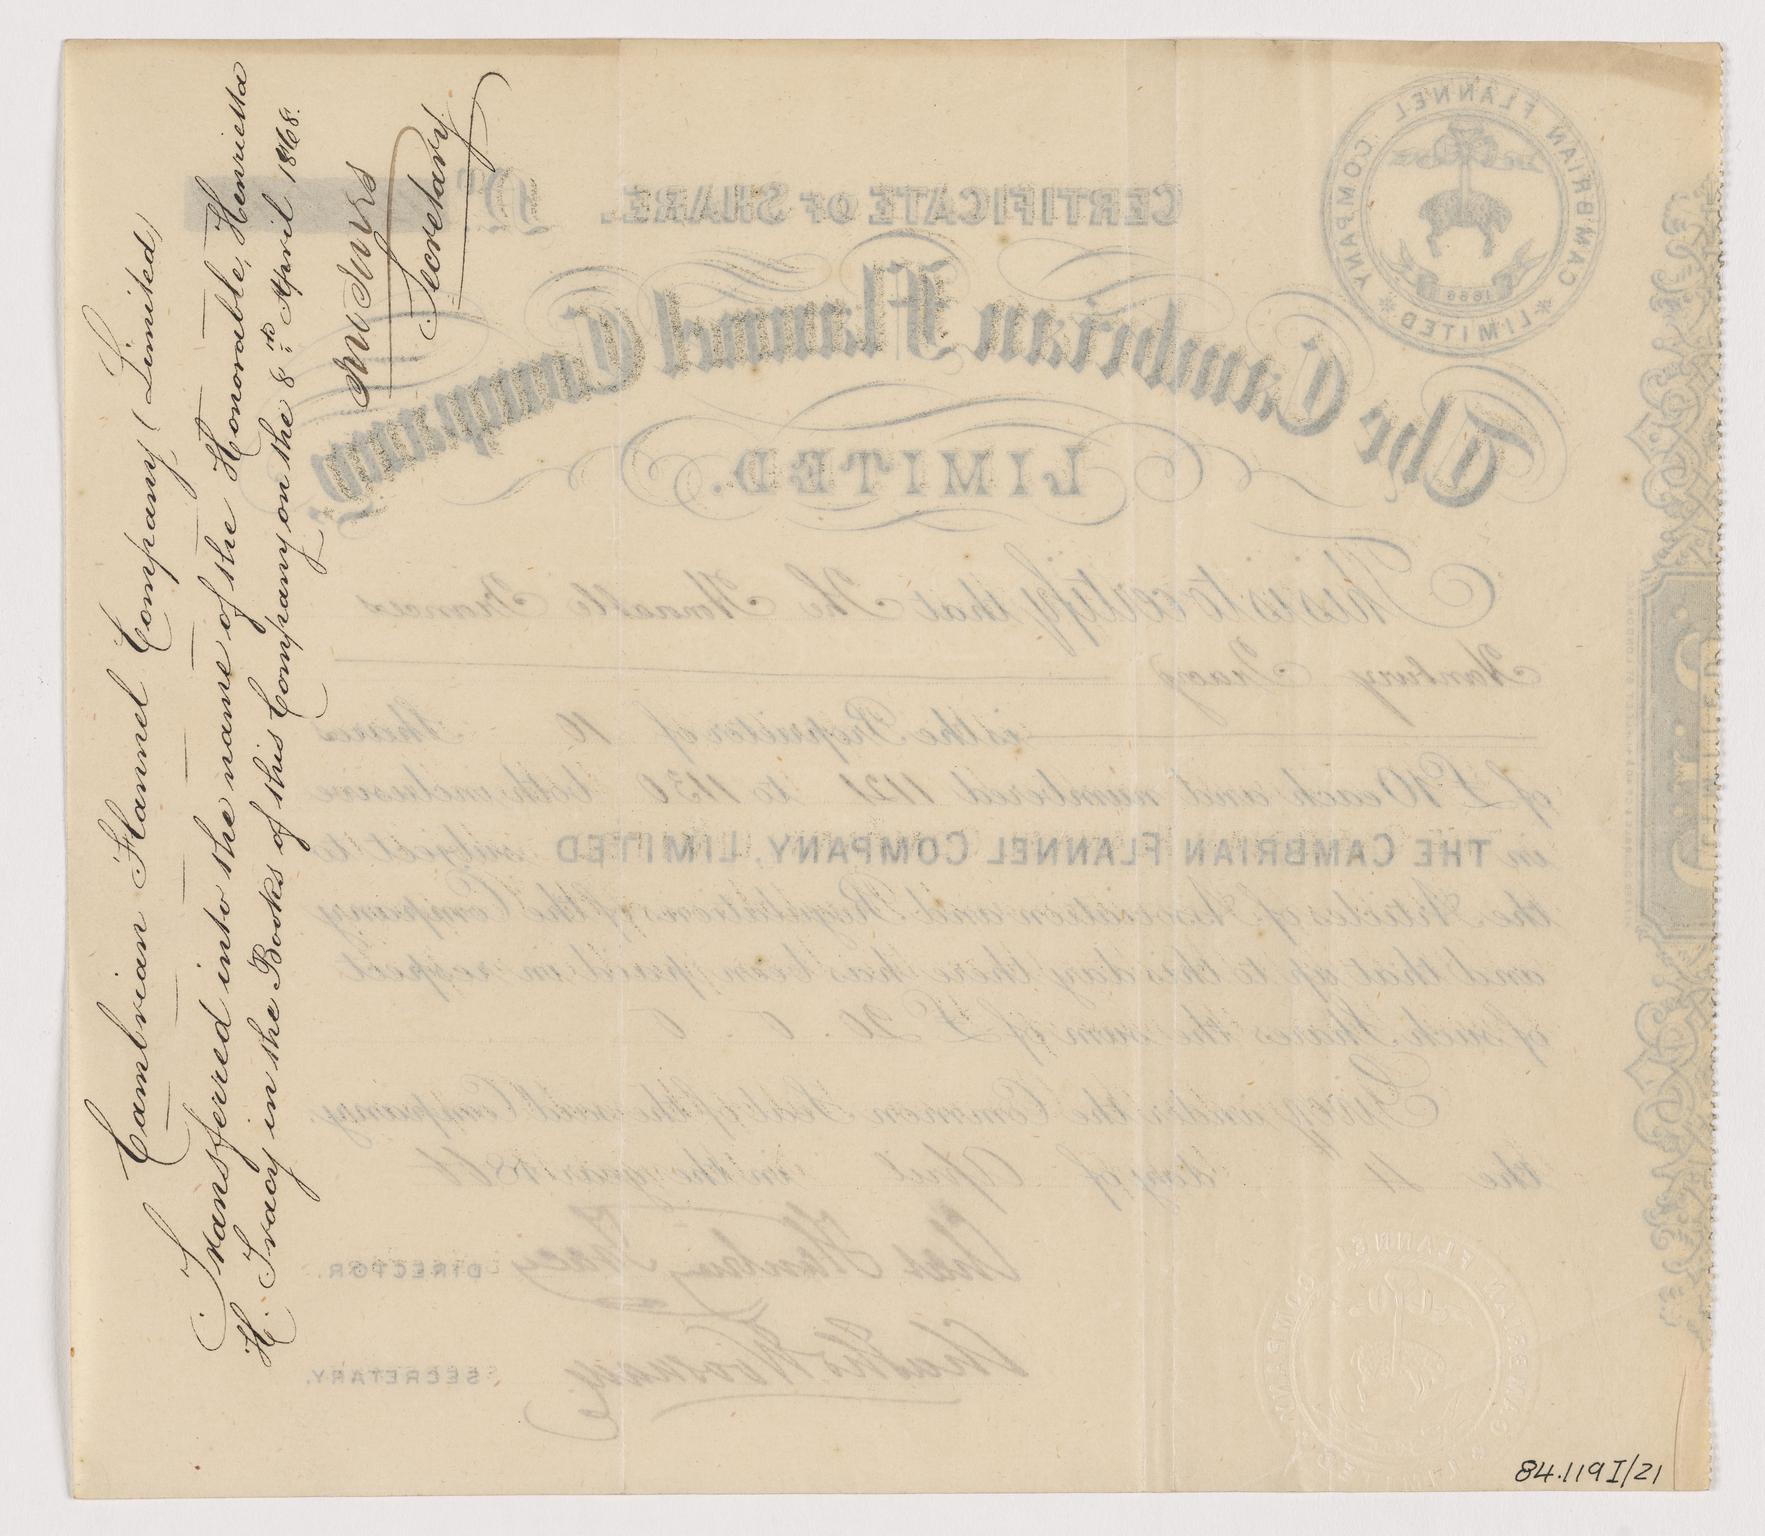 Cambrian Flannel Company Limited, share cert.